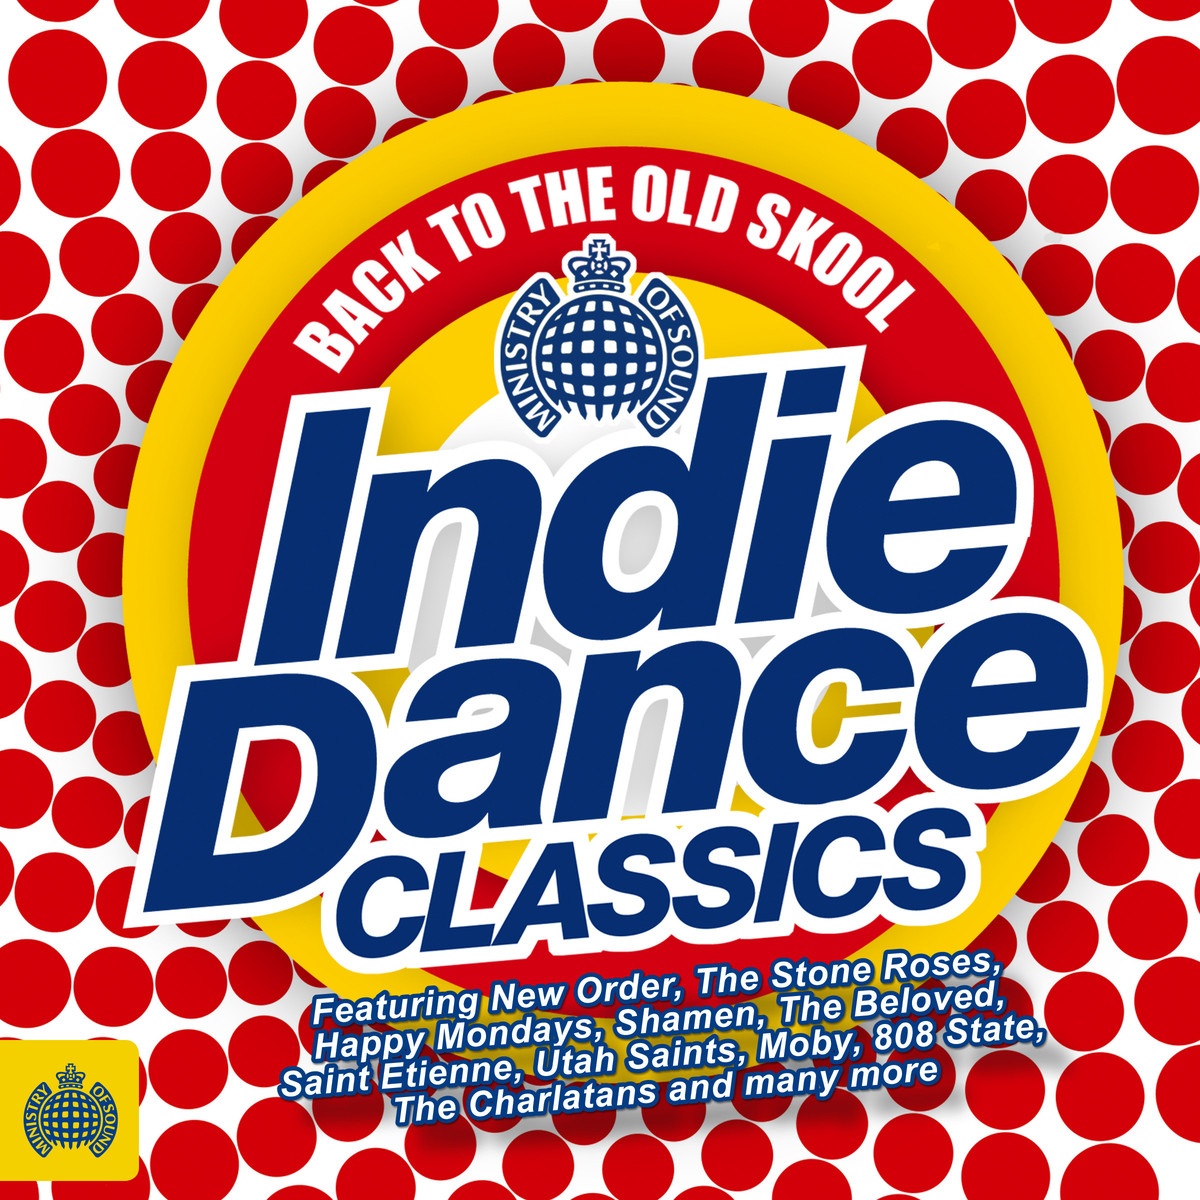 Back to the Old Skool Indie Dance Classics